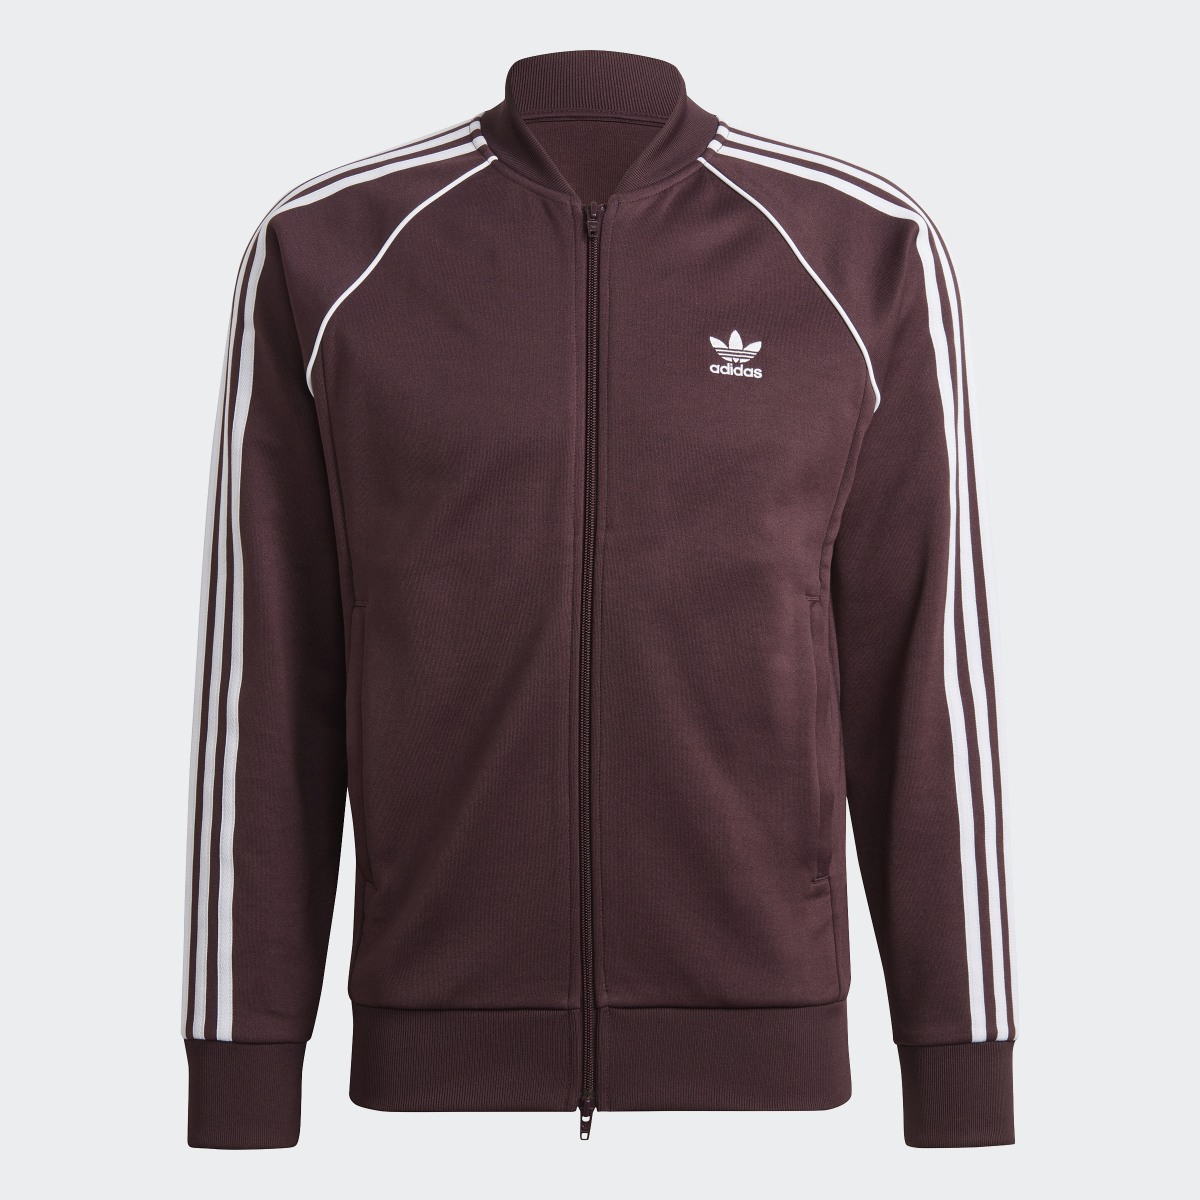 Adidas SST Track Top. 6